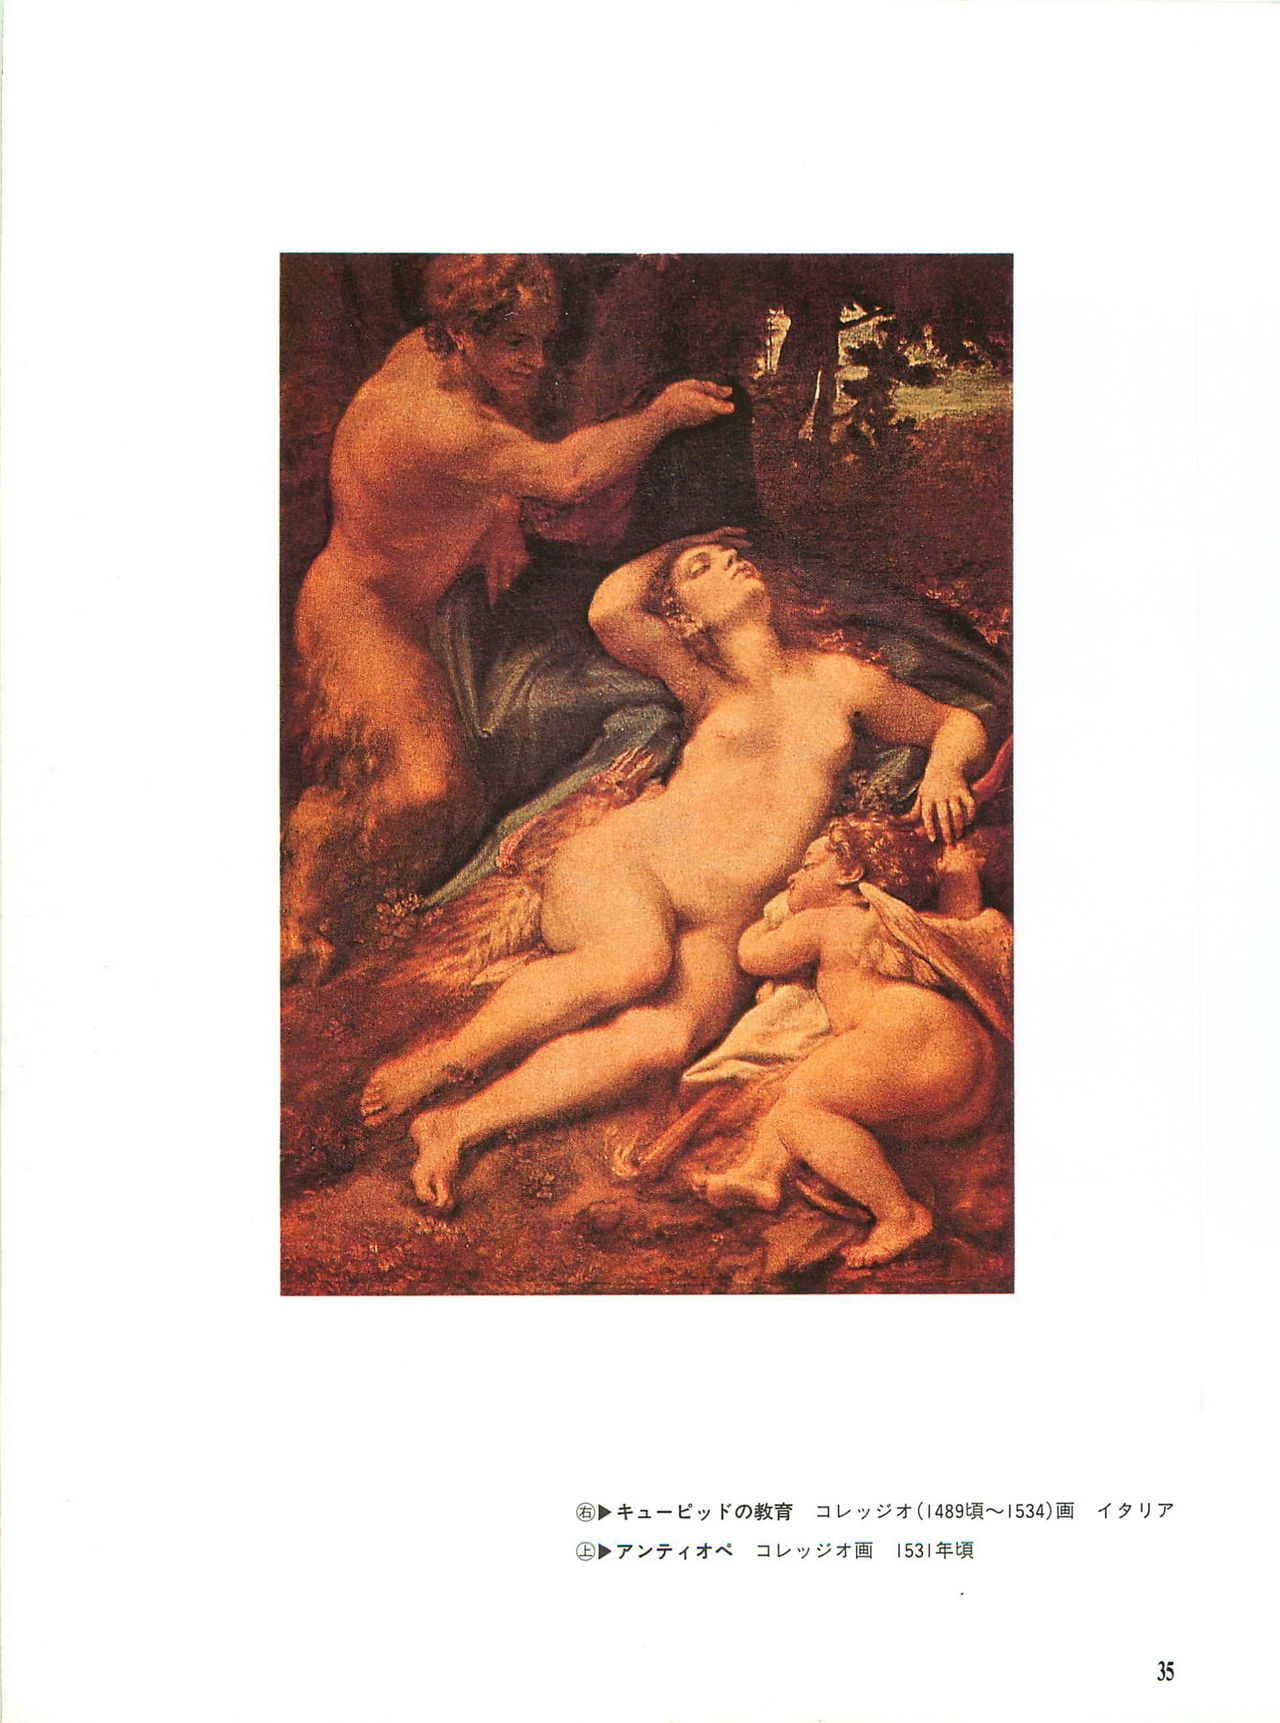 World of Eros: Erotic pieces of the masters 38